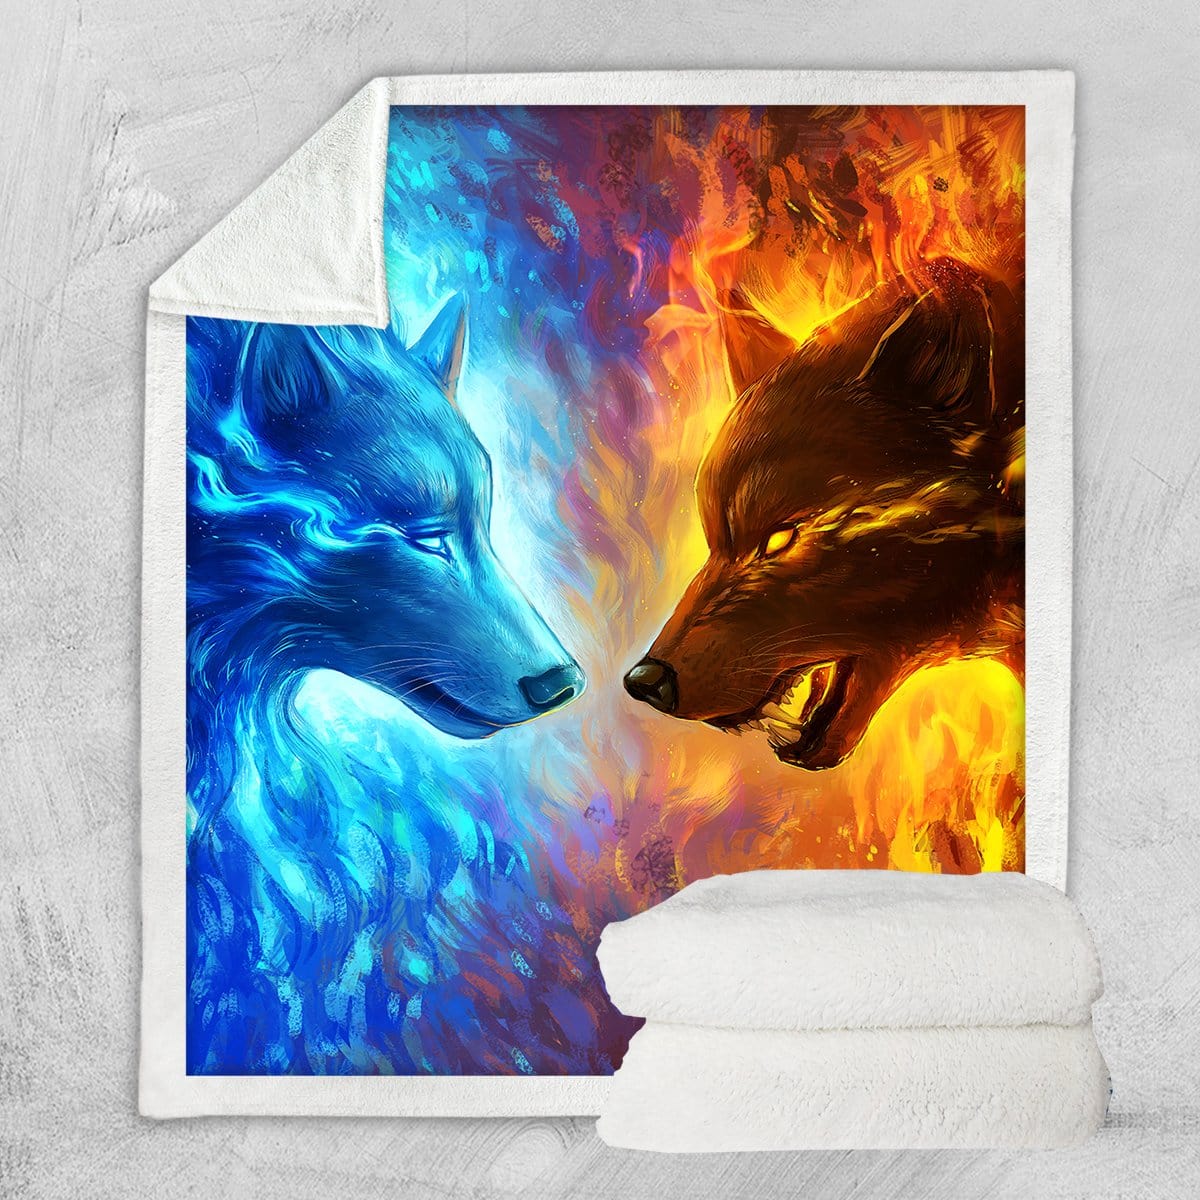 Fire and Ice Fire and Ice Blanket